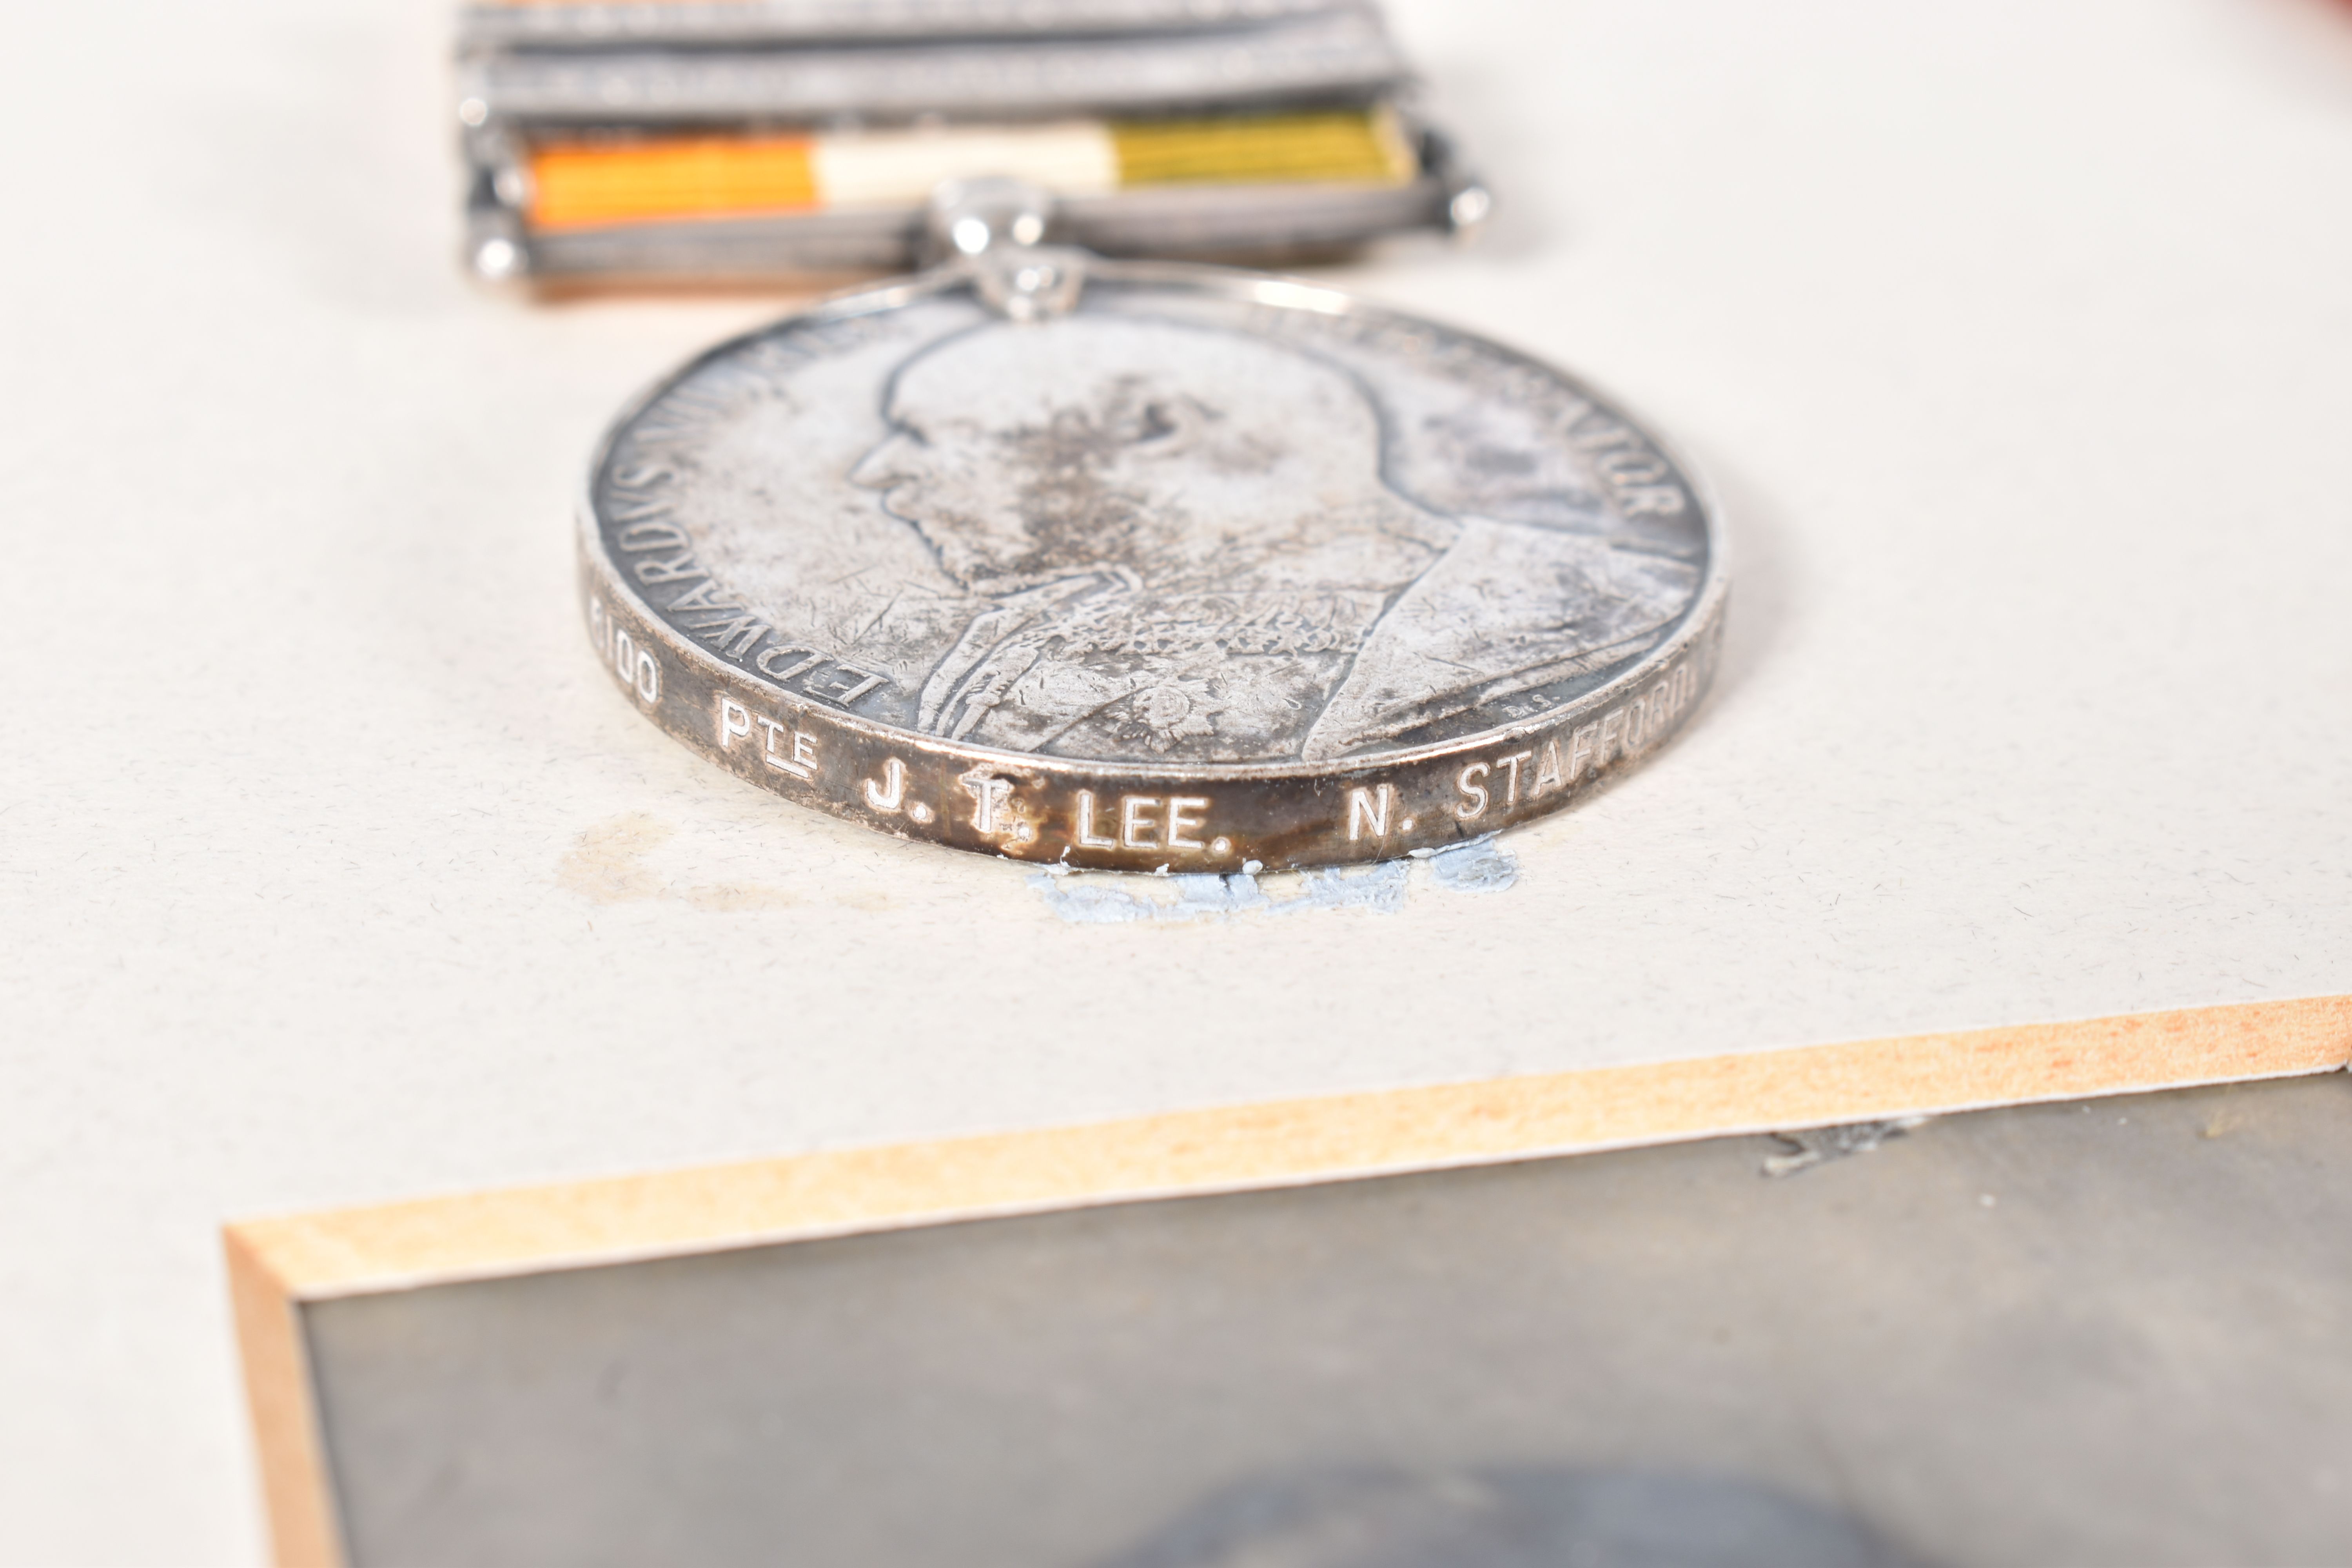 A NORTH STAFFORDSHIRE REGIMENT BOER WAR AND WWI 1914 MONS STAR TRIO OF MEDALS, the Boer War pair are - Image 11 of 25